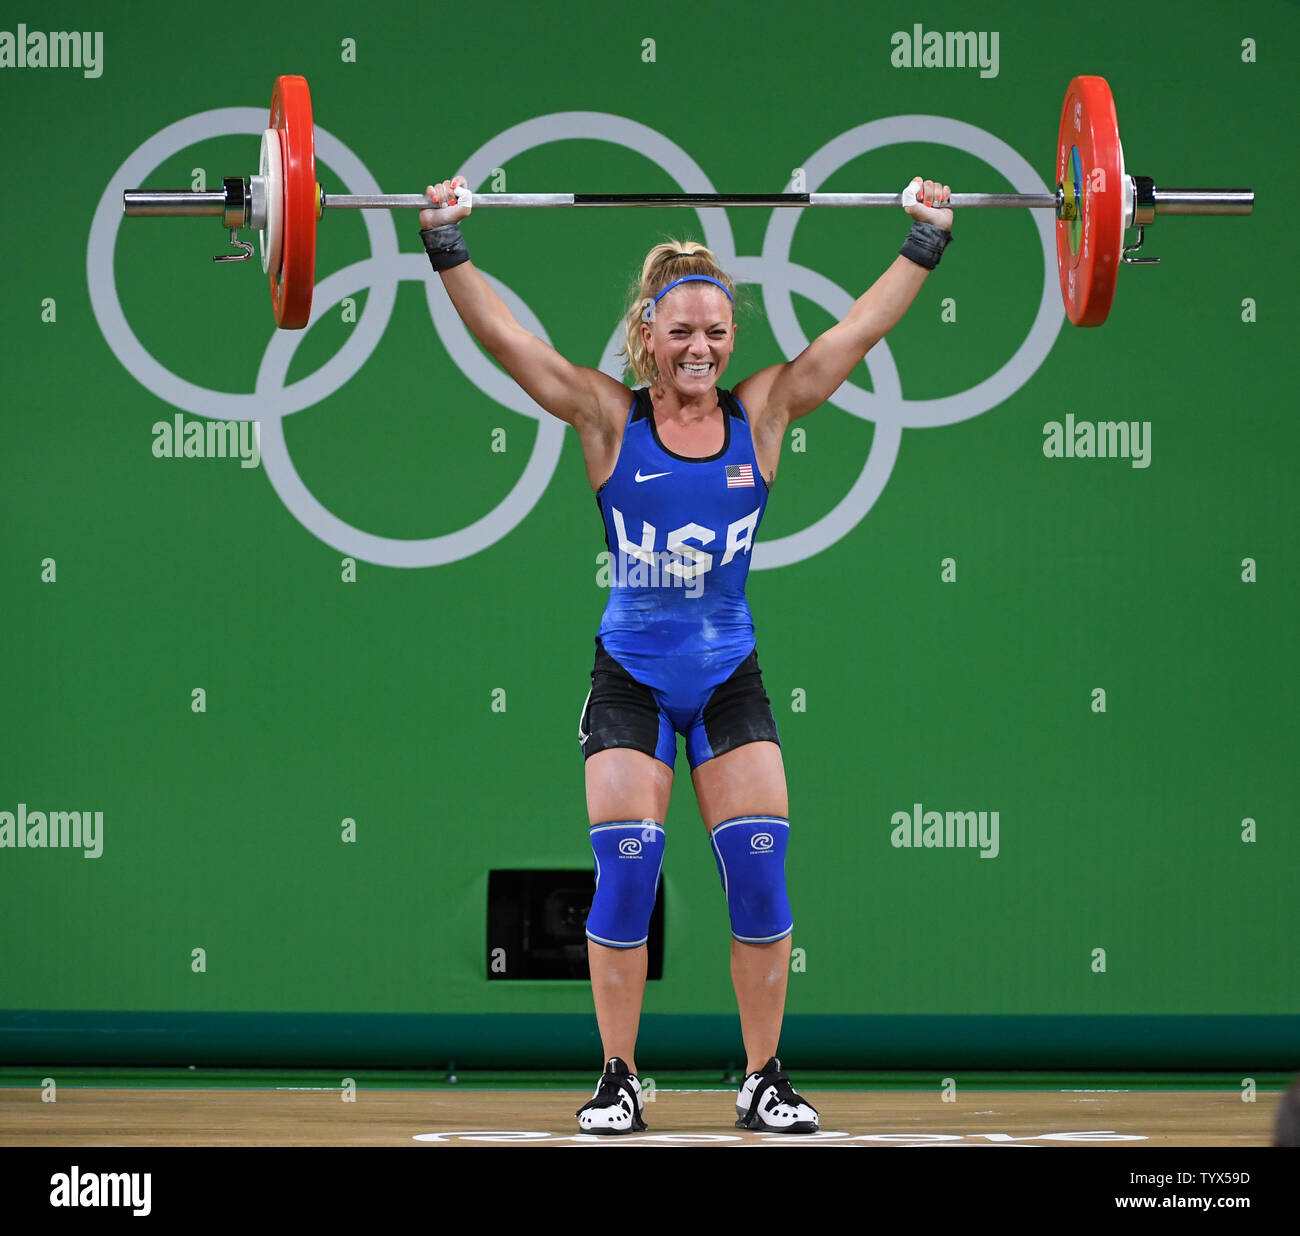 Redmond's Morghan King finishes sixth in women's 48kg weightlifting